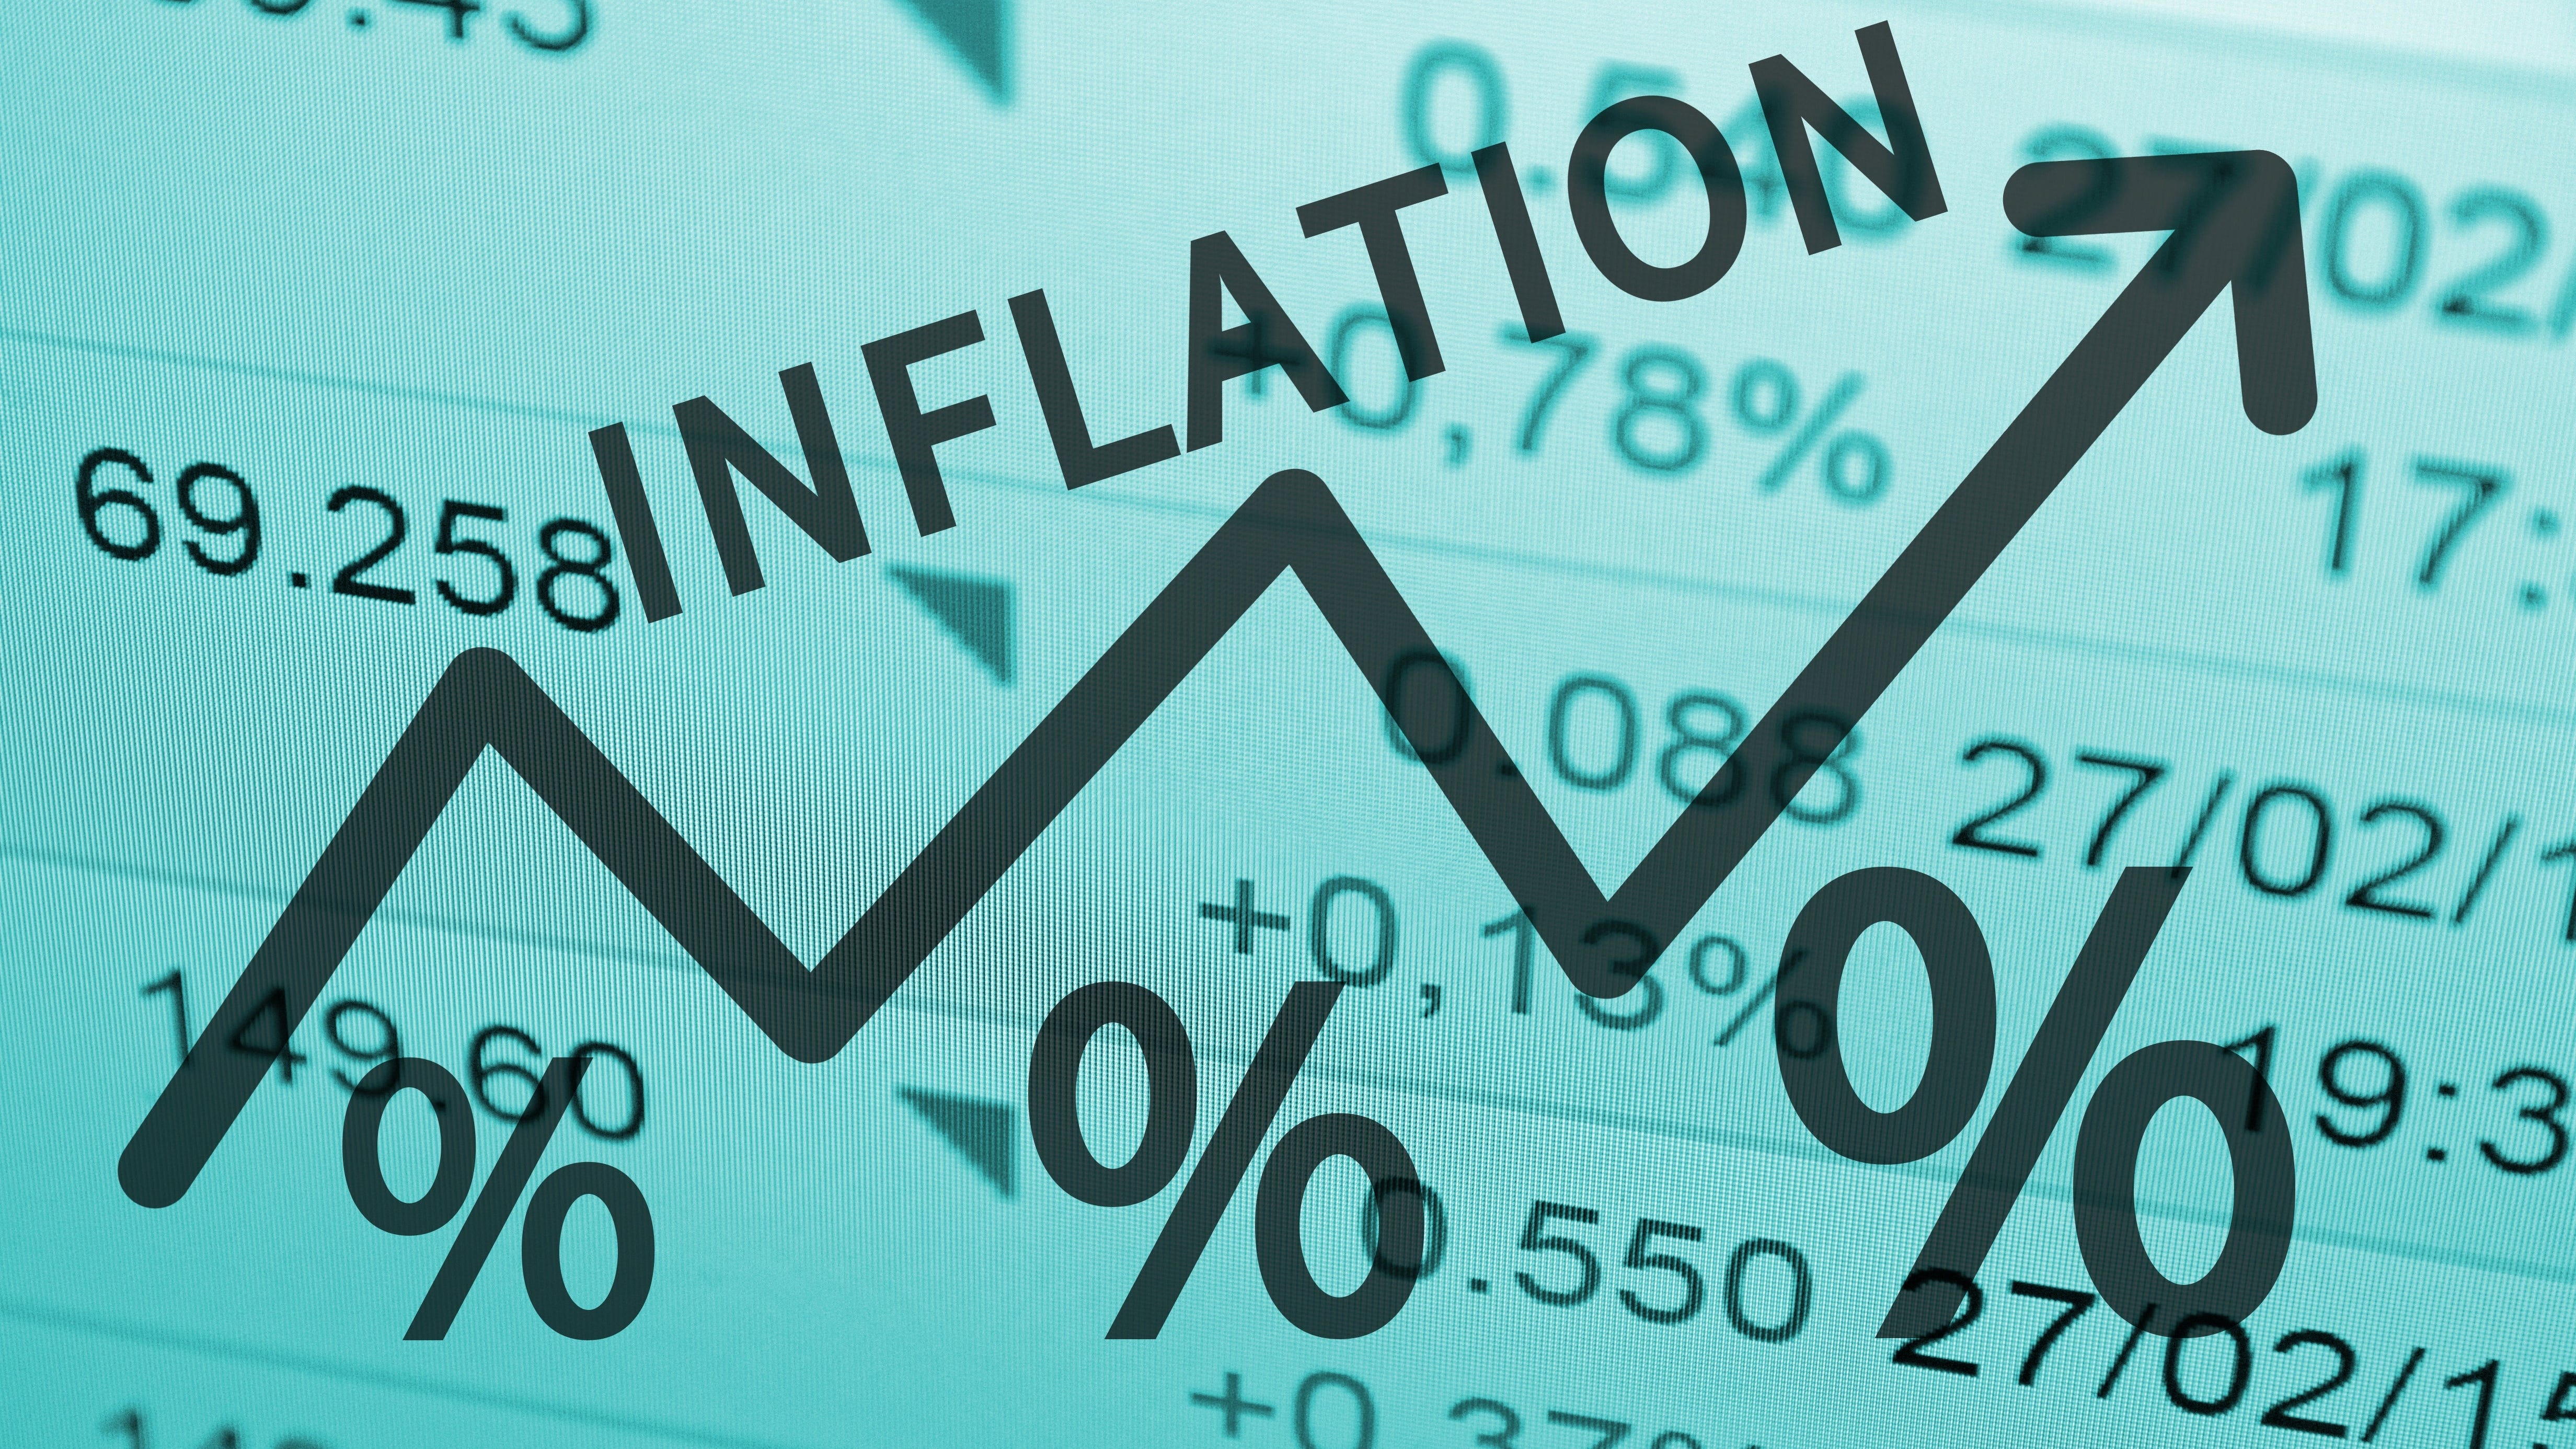 Is a recession coming in 2022? Has inflation peaked? How to tell